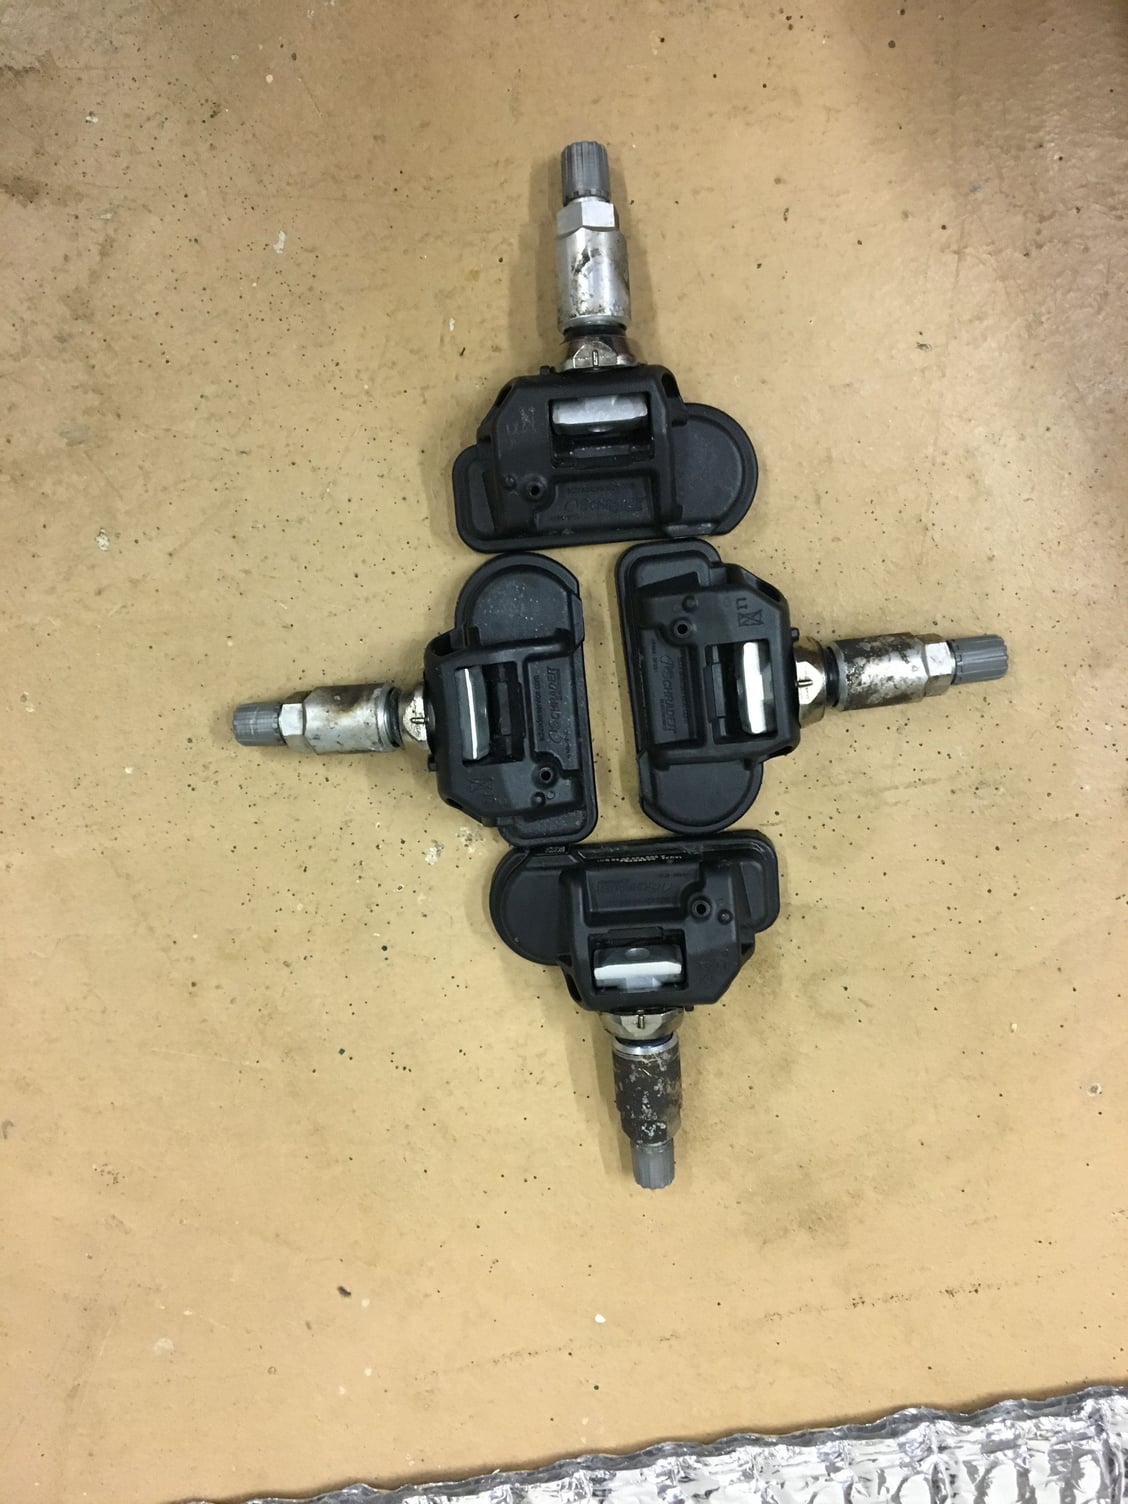 Wheels and Tires/Axles - OEM TPMS Sensors - Mercedes C, GL, GLA, M, ML, S Class - Used - Plymouth, MN 55447, United States